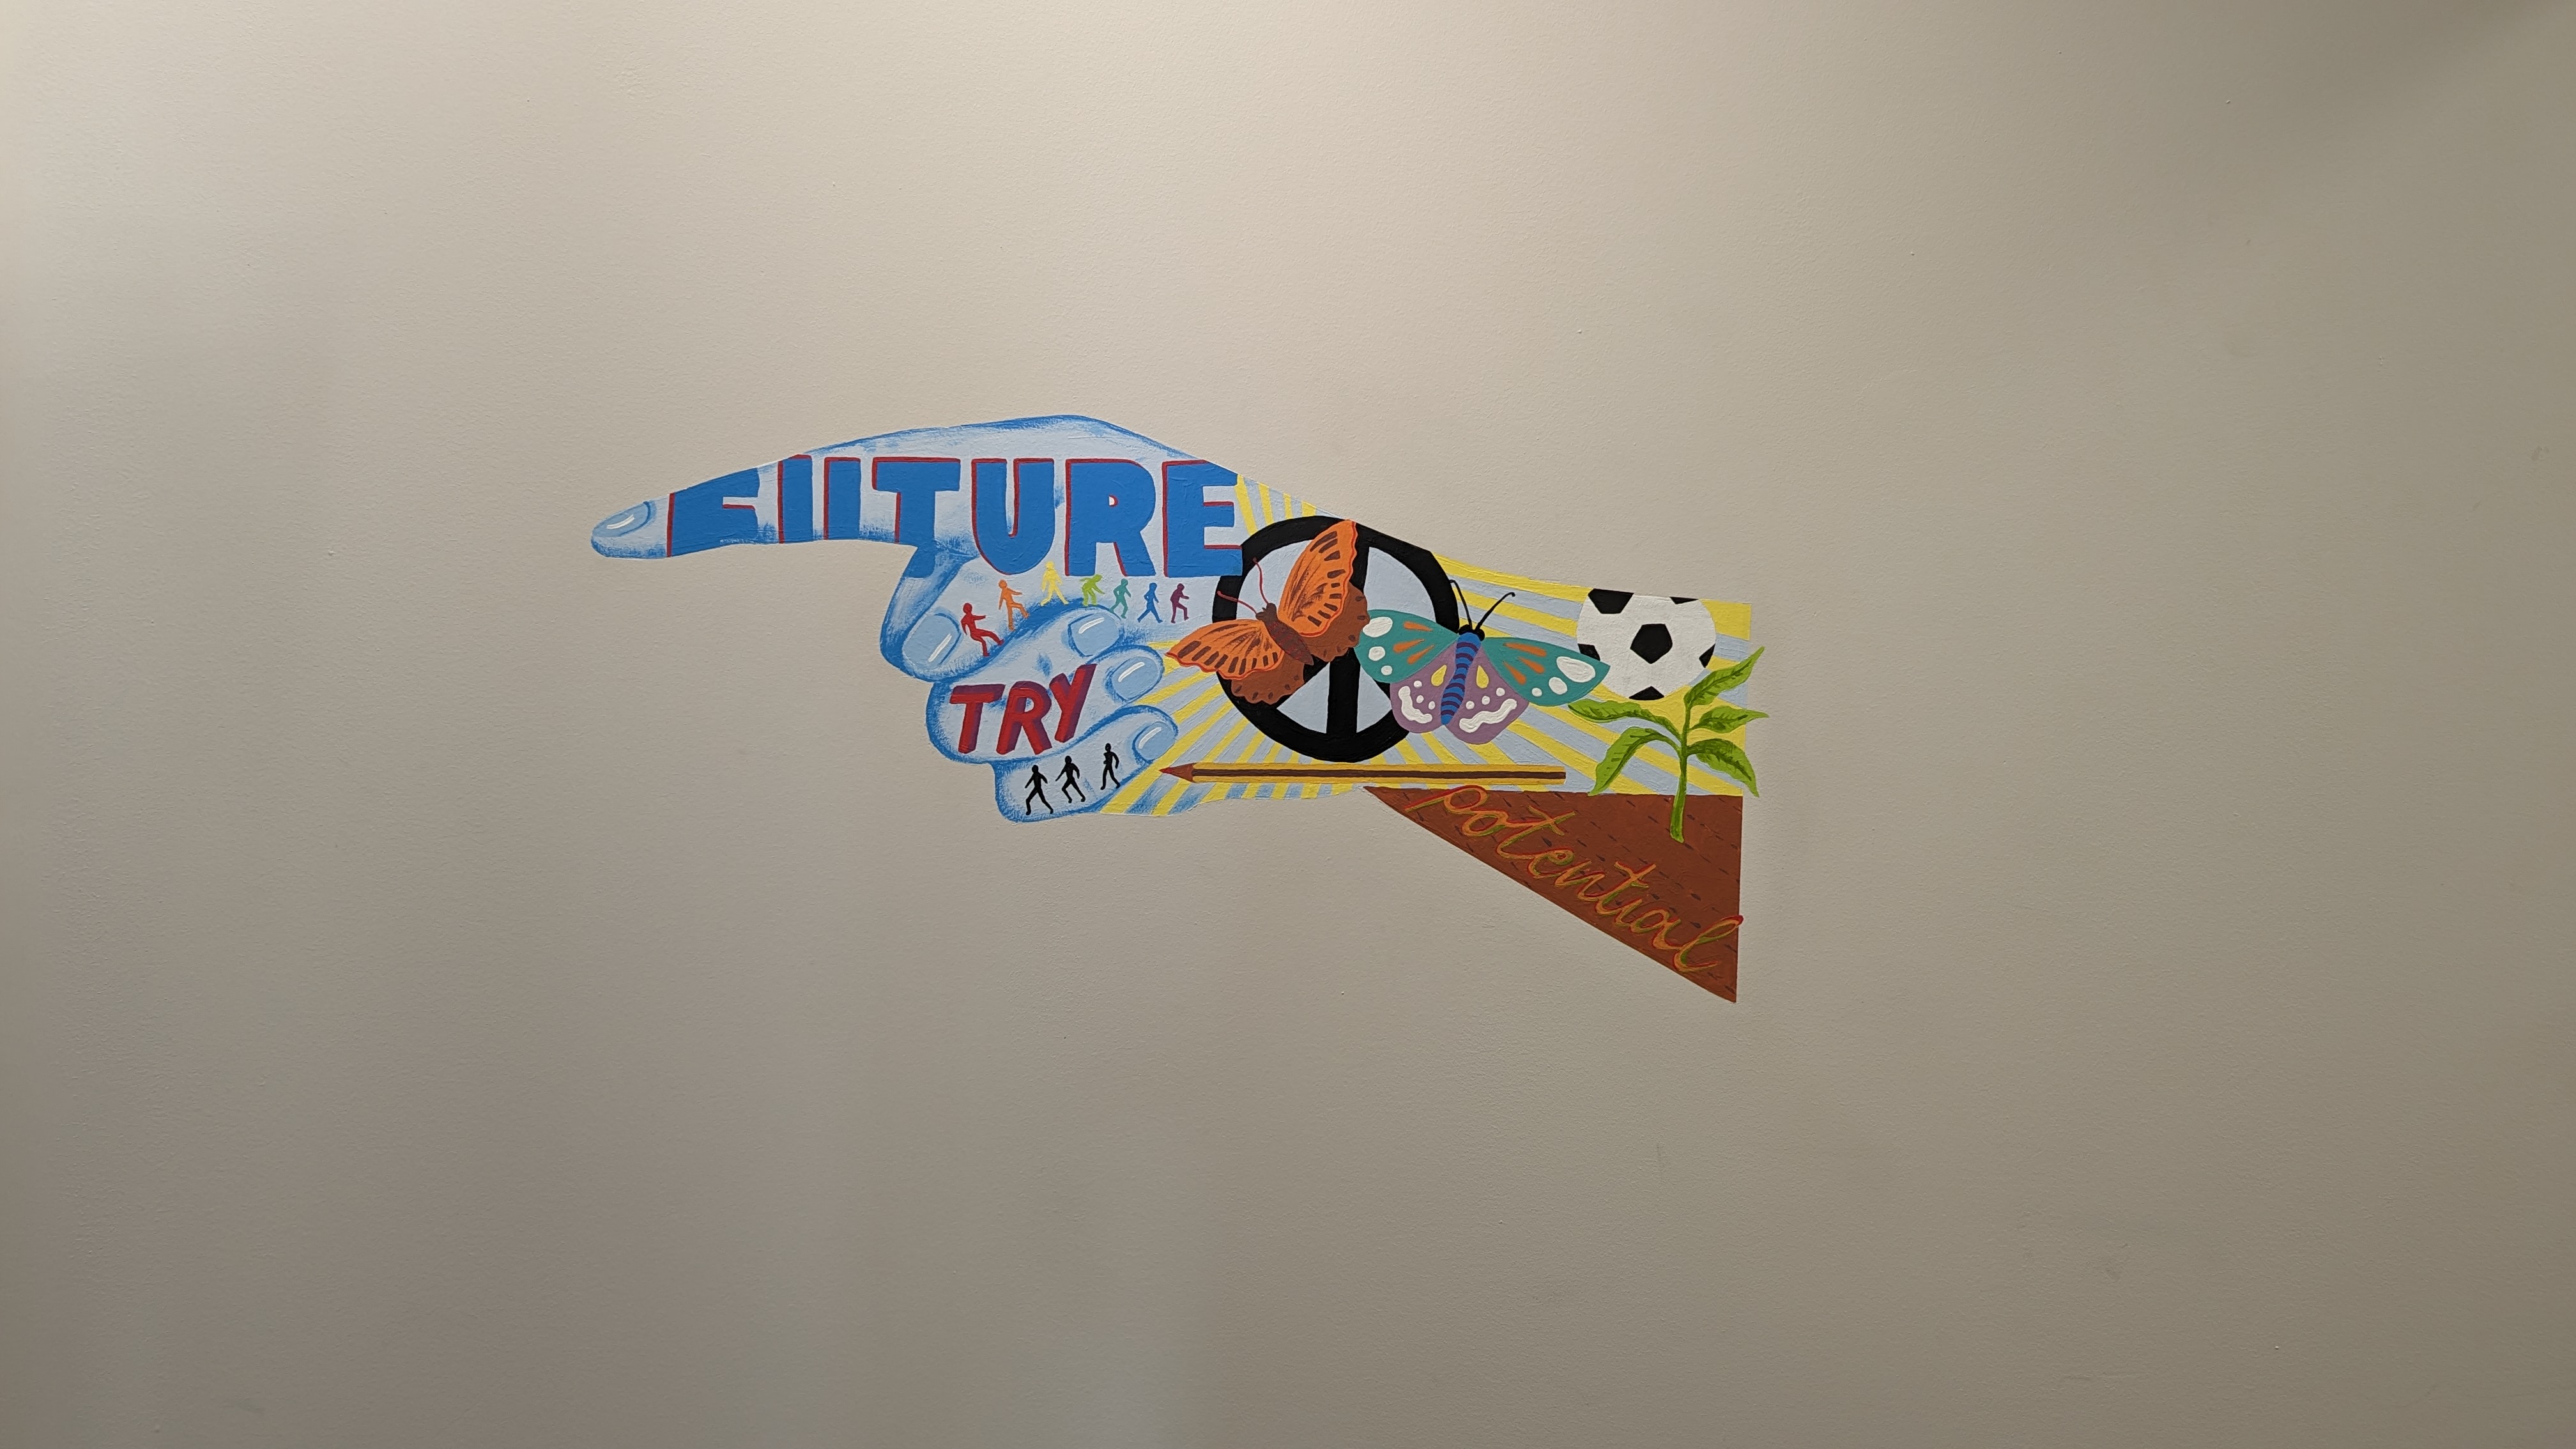 Mural on the wall at the Newham Young Adult Hub, which has been praised by the Ministry of Justice.